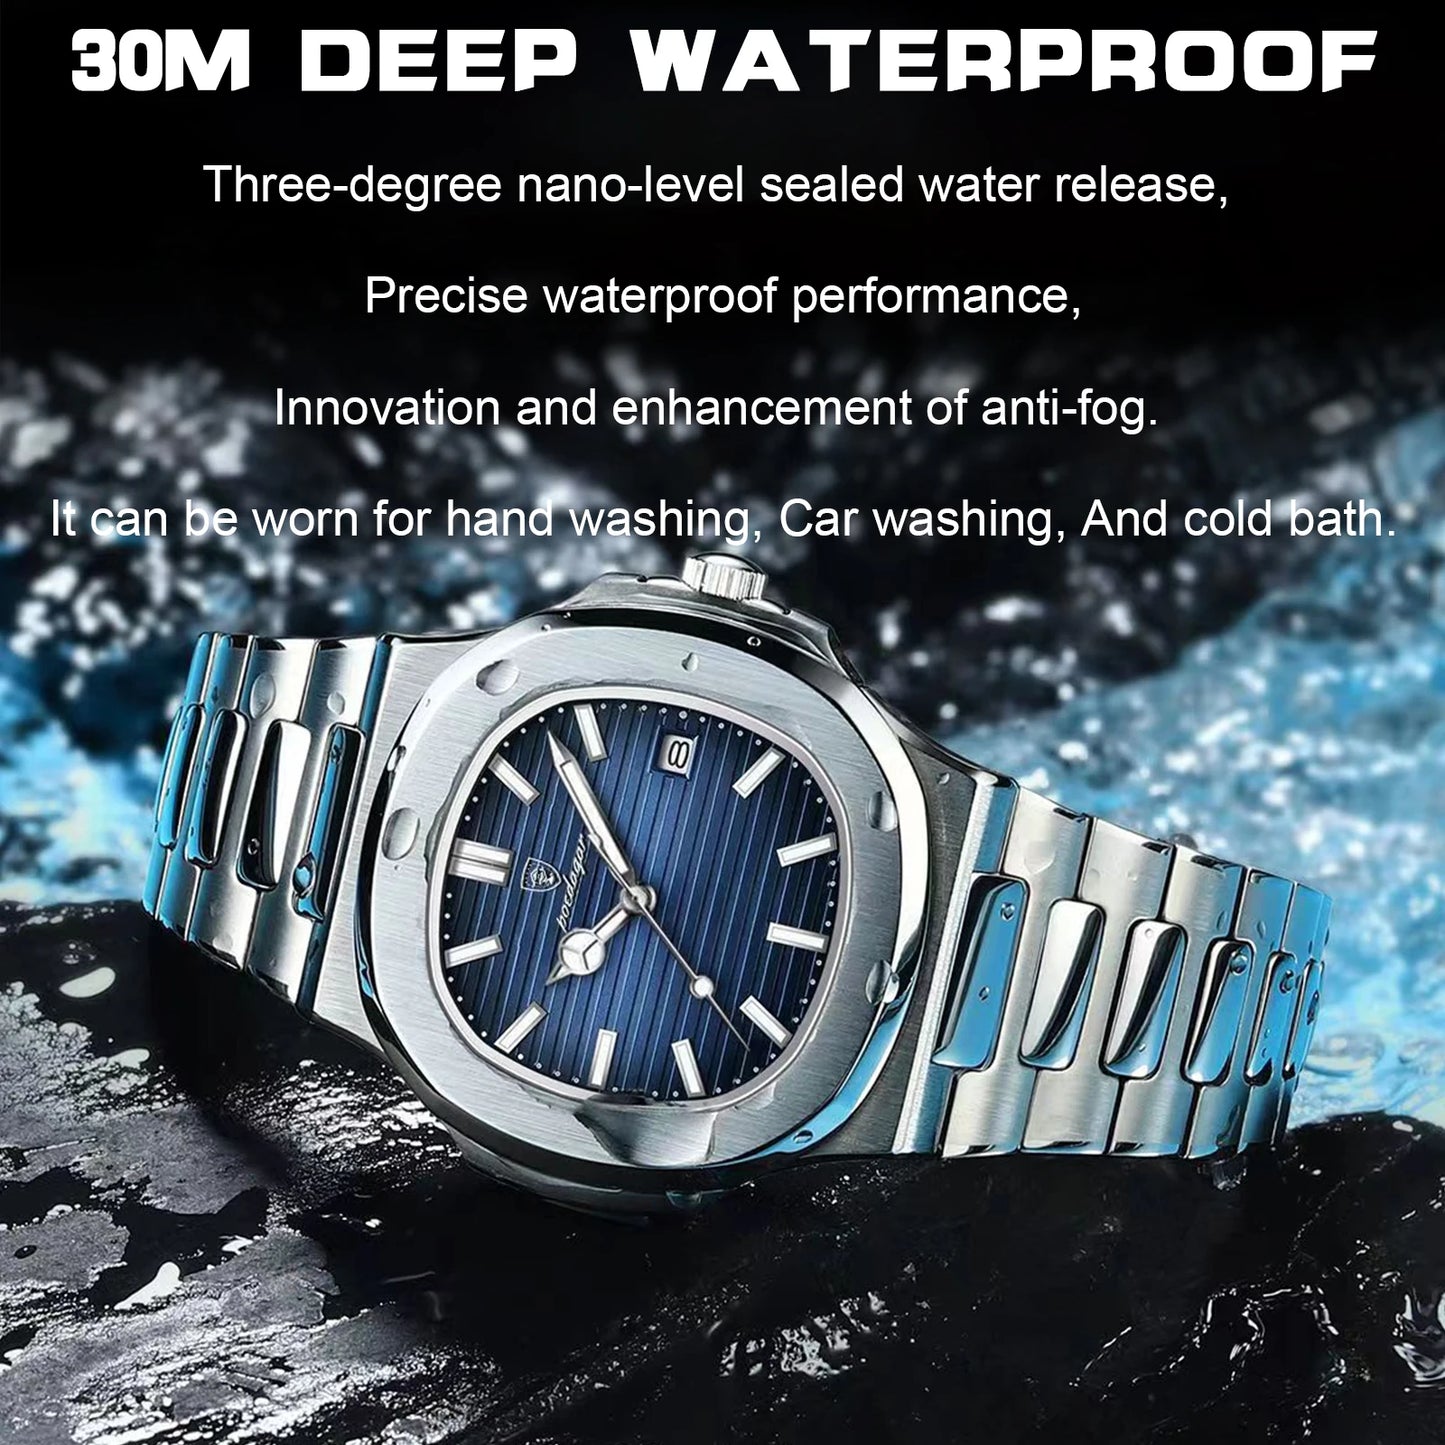 Upgrade Your Style with 2023 POEDAGAR Luxury Watch - Waterproof, Luminous, Stainless Steel - Limited Stock!